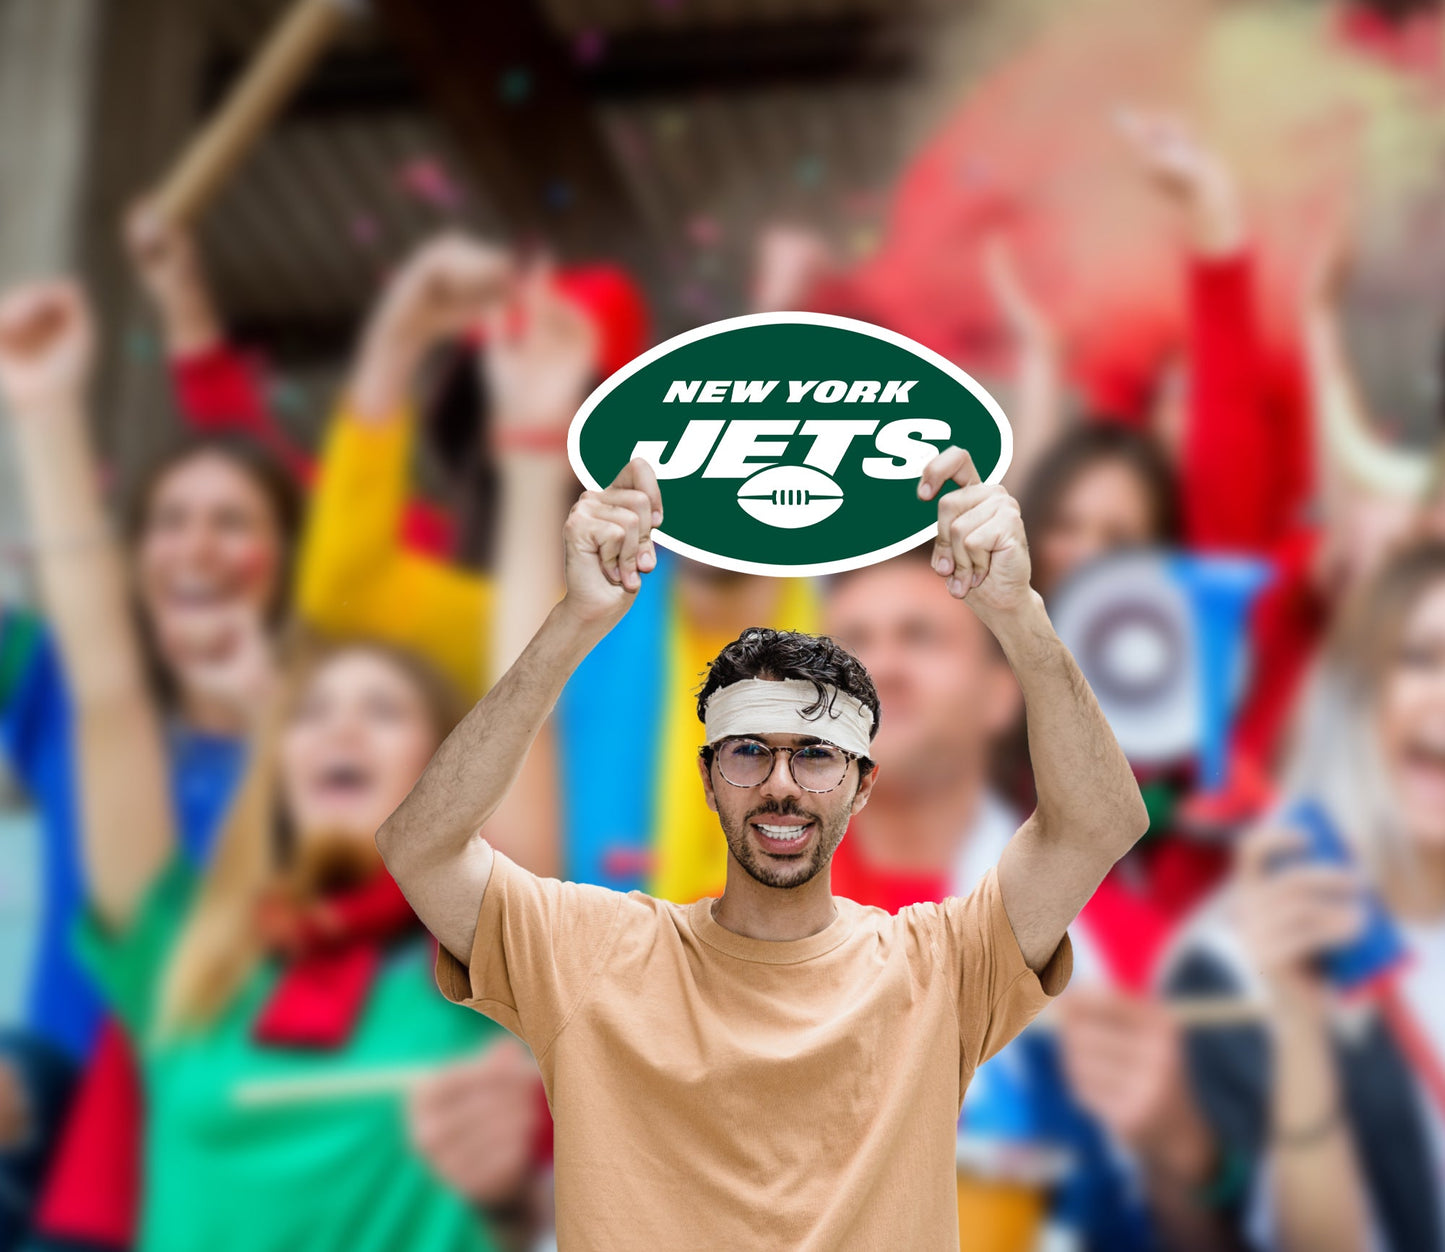 New York Jets: Logo Foam Core Cutout - Officially Licensed NFL Big Head